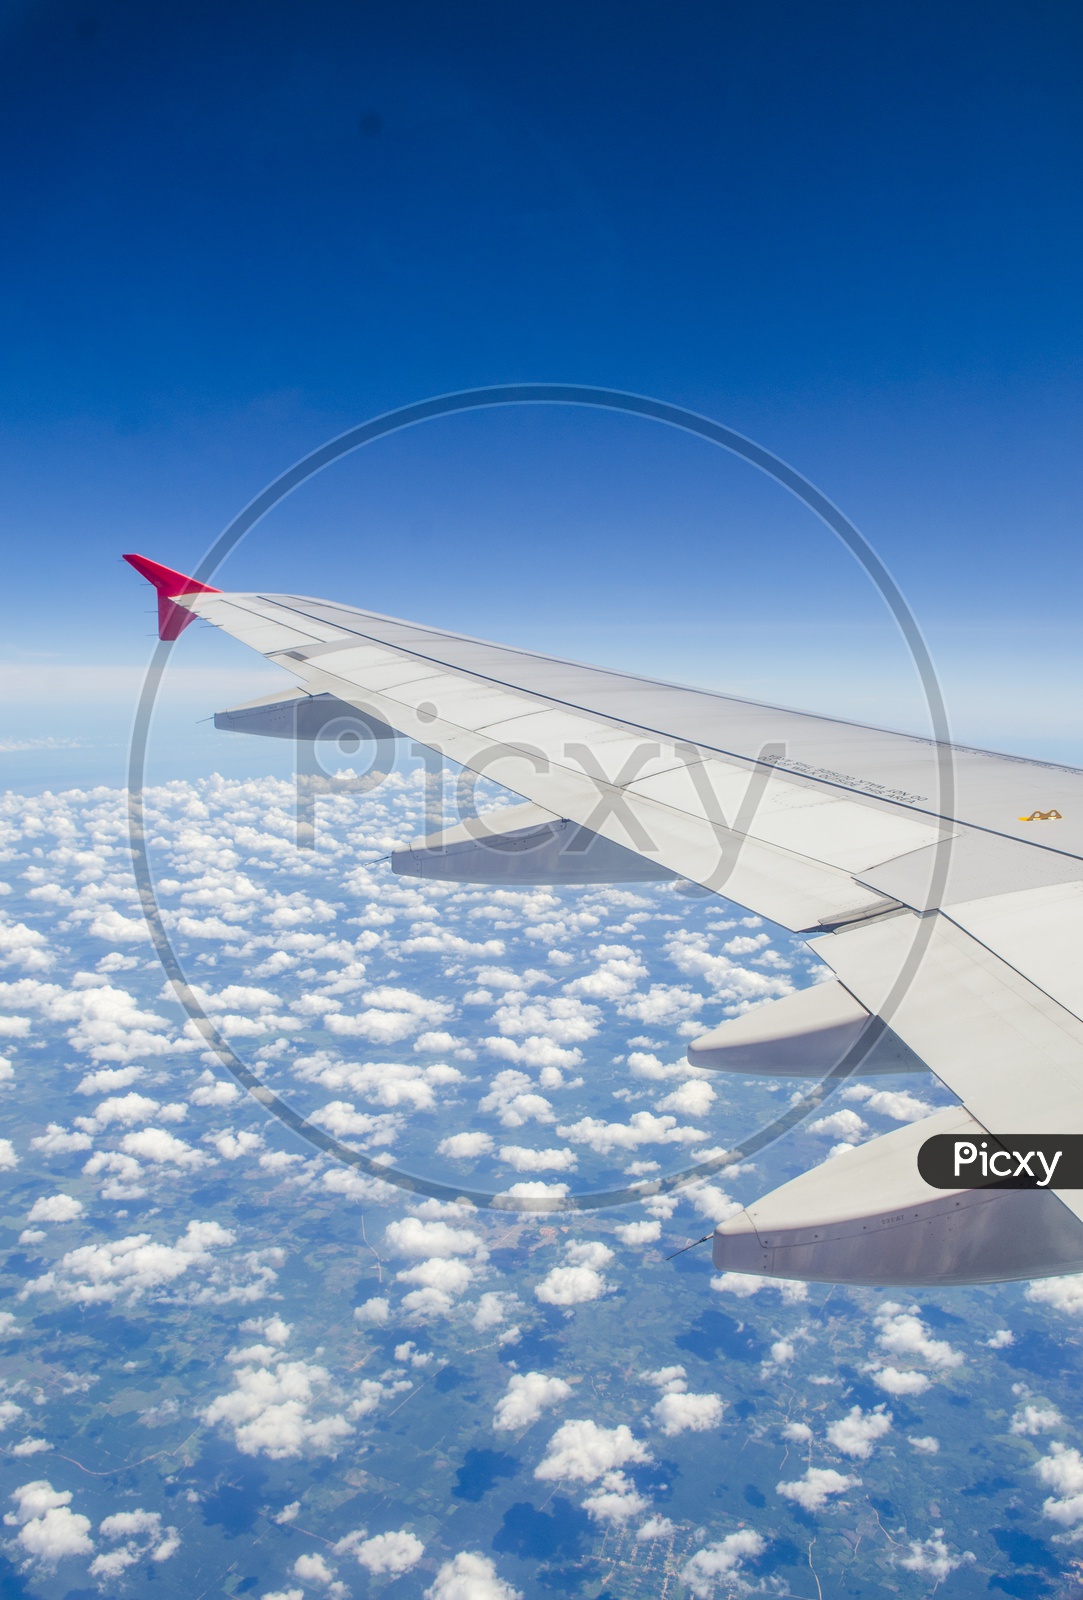 Wing of an airplane with blue sky and cotton candy clouds